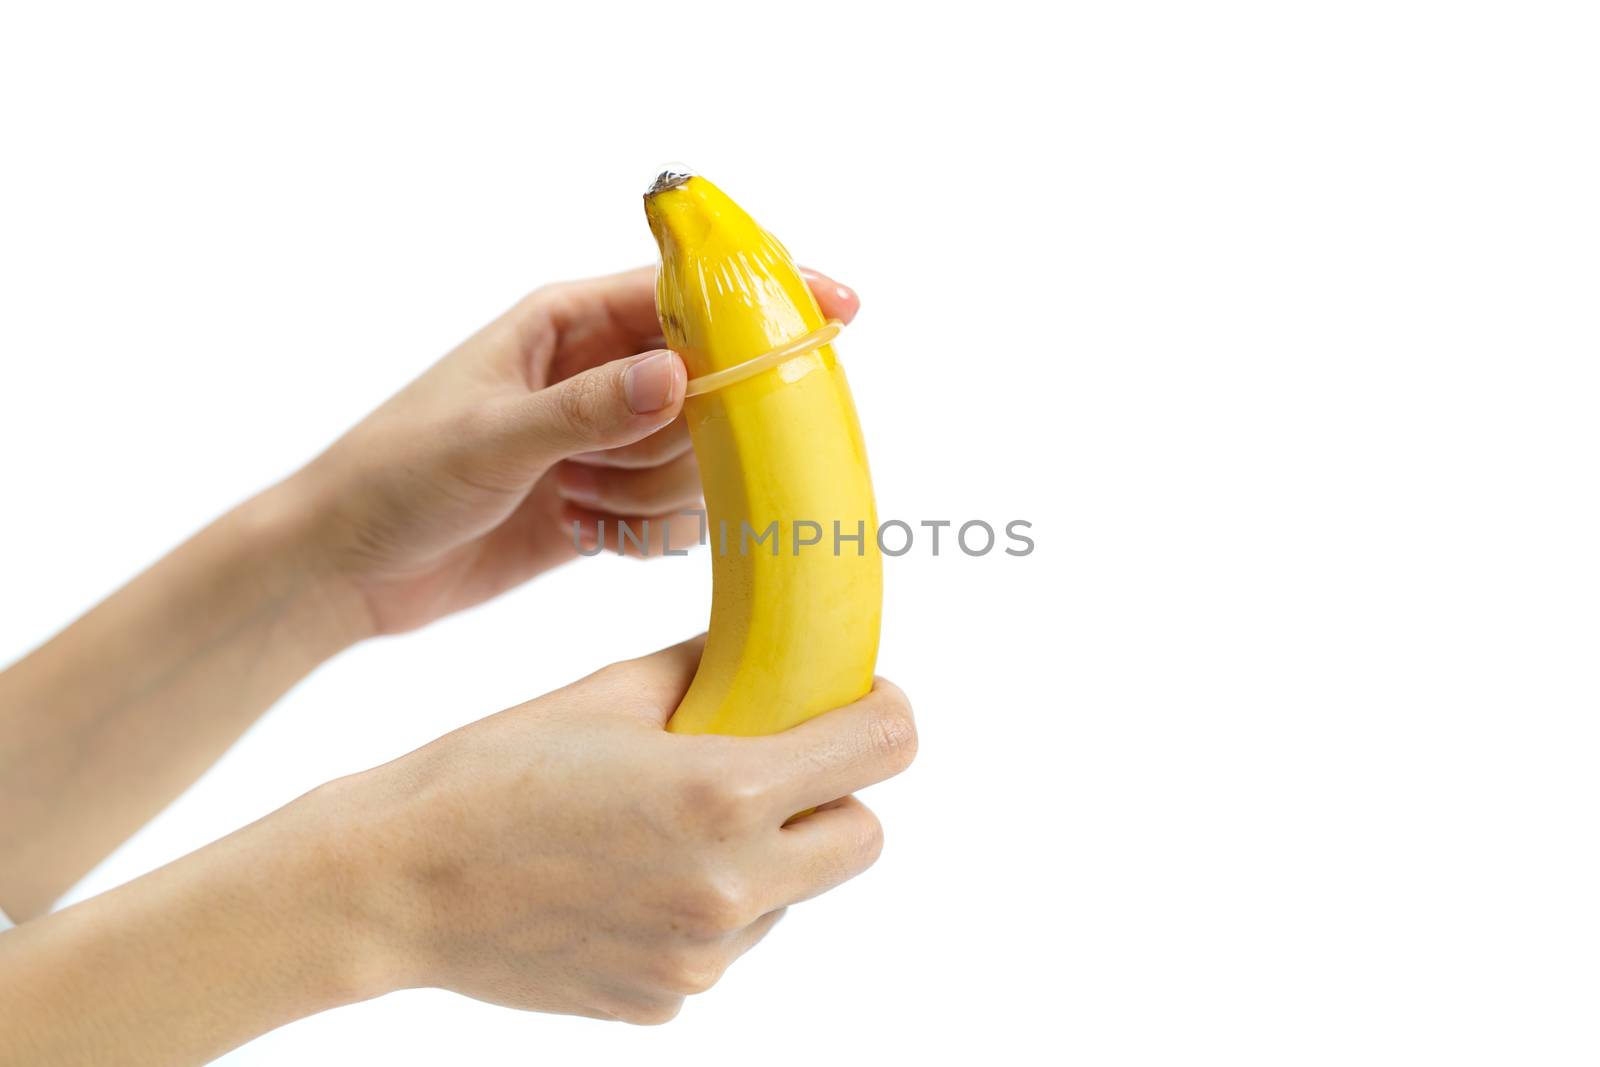 Condom on banana on white background, Safe sex concept. isolated